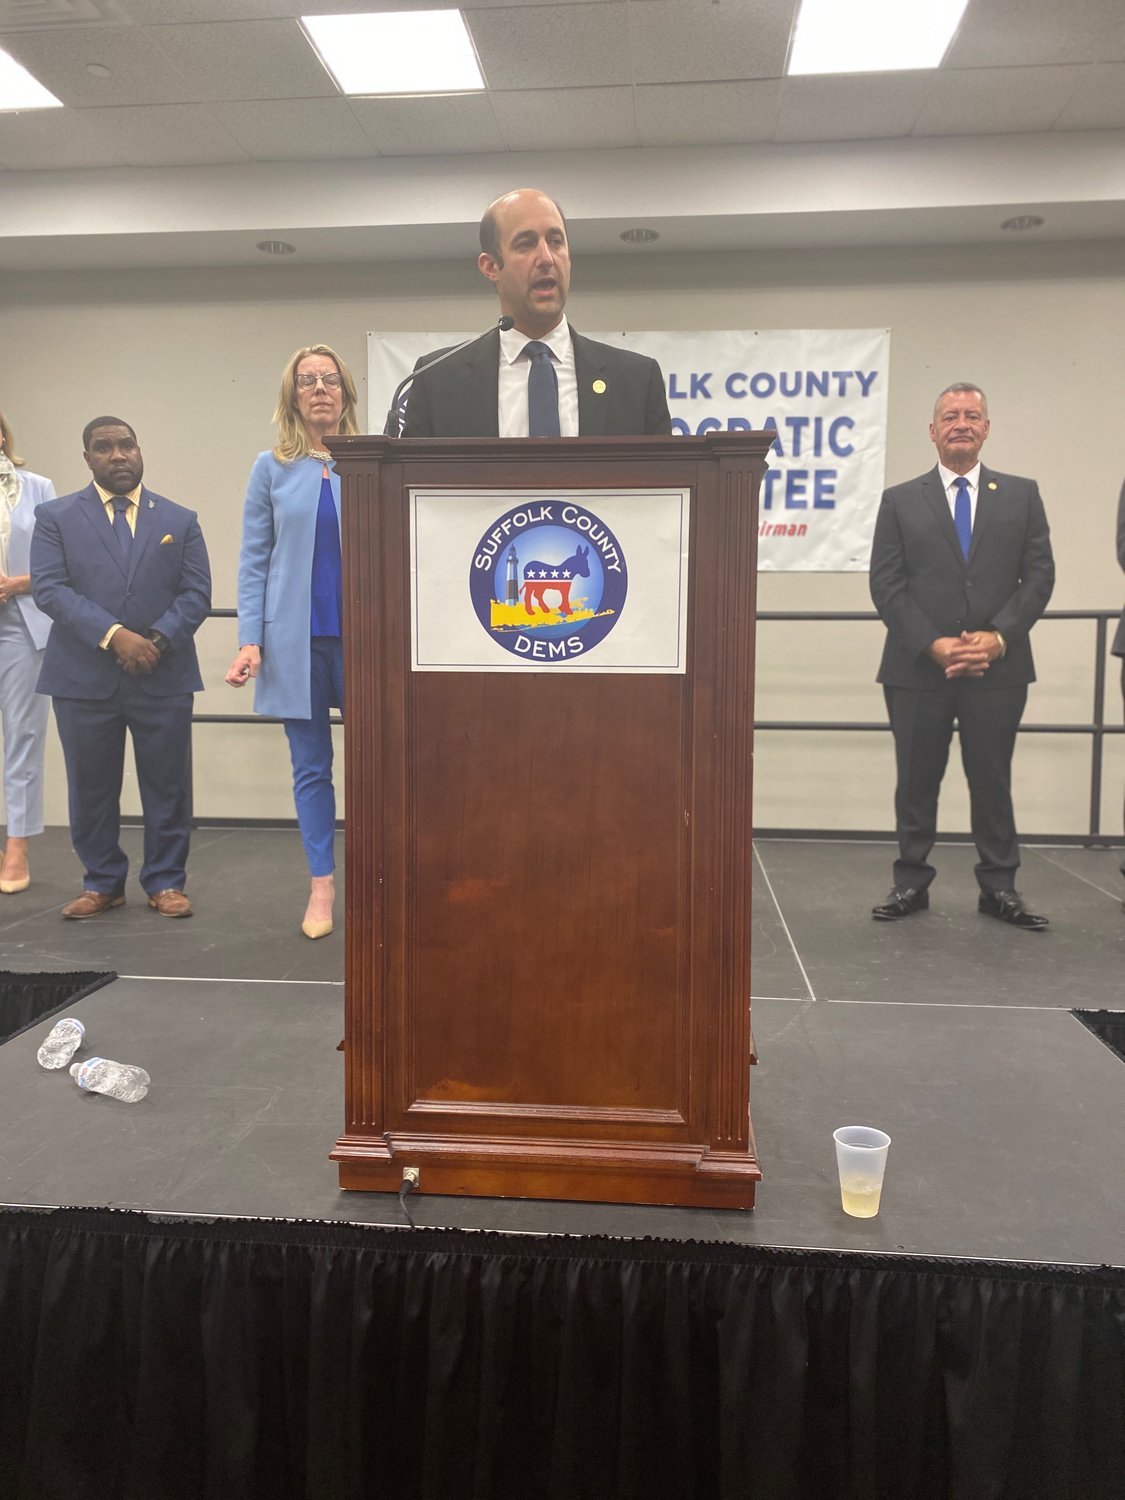 Closing out the evening, Suffolk County Democratic Committee chairman Rich Schaefer and Calarco spoke about the future of Suffolk County’s Democratic Party saying they’d now be concentrating on the next election, two years from now.